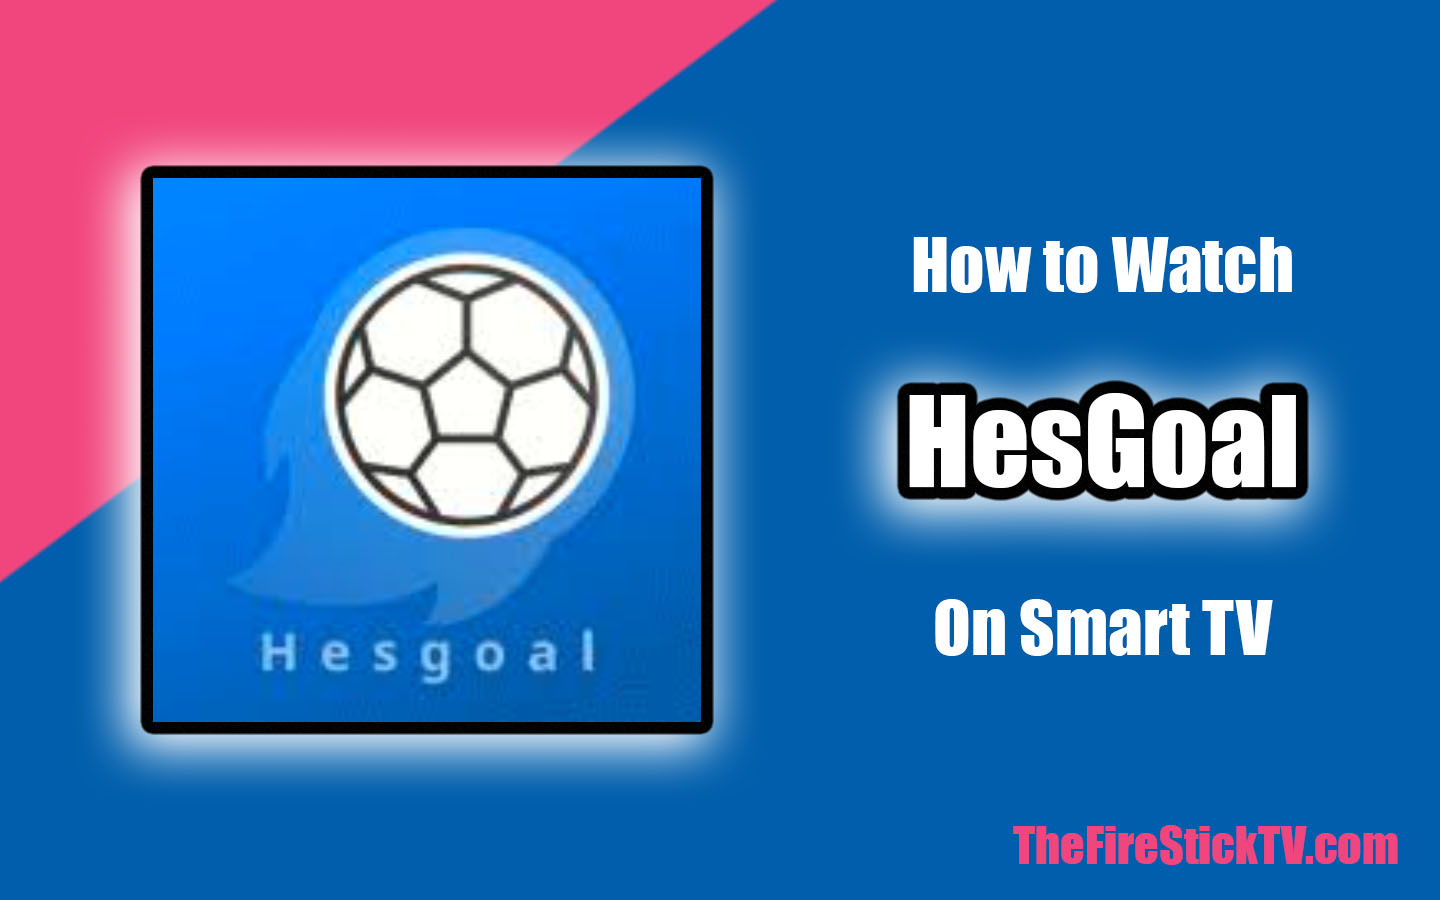 How to Watch Hesgoal on Smart TV